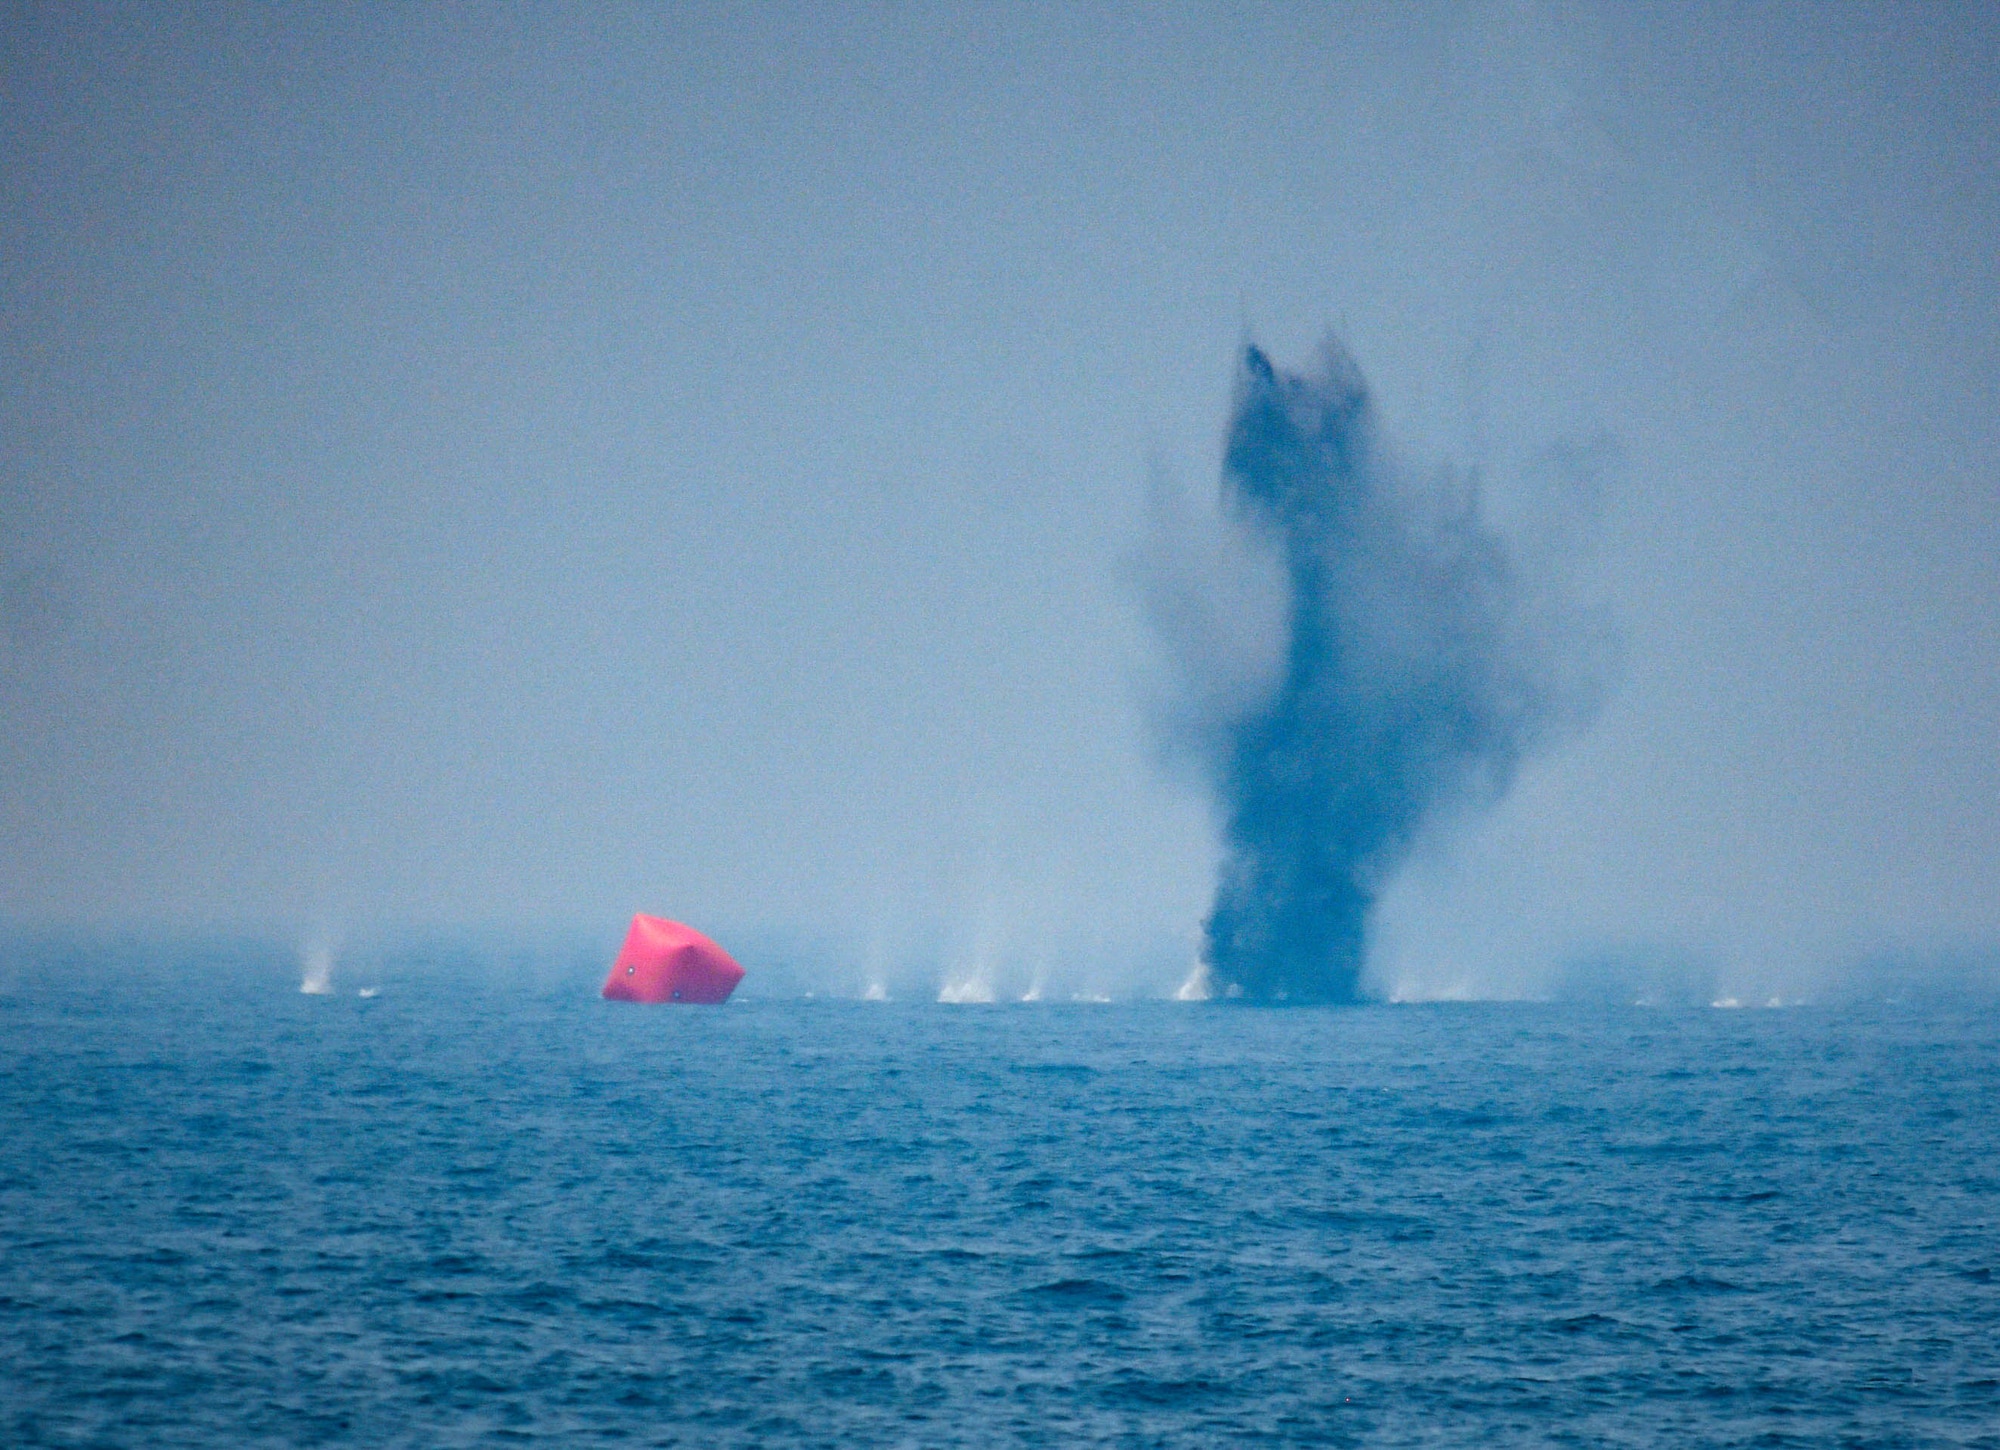 An inflatable target takes fire from an AC-130W Stinger II gunship, attached to Special Operations Command Central, during an air operations in support of maritime surface warfare exercise with United Arab Emirates Joint Aviation Command forces in the Arabian Gulf Aug. 11, 2020. Integration operations between UAE and U.S. maritime forces are regularly held to maintain interoperability and the capability to counter threats posed in the maritime domain, ensuring freedom of navigation and free flow of commerce throughout the region’s heavily trafficked waterways. (U.S. Army photo by Staff Sgt. Timothy Clegg)